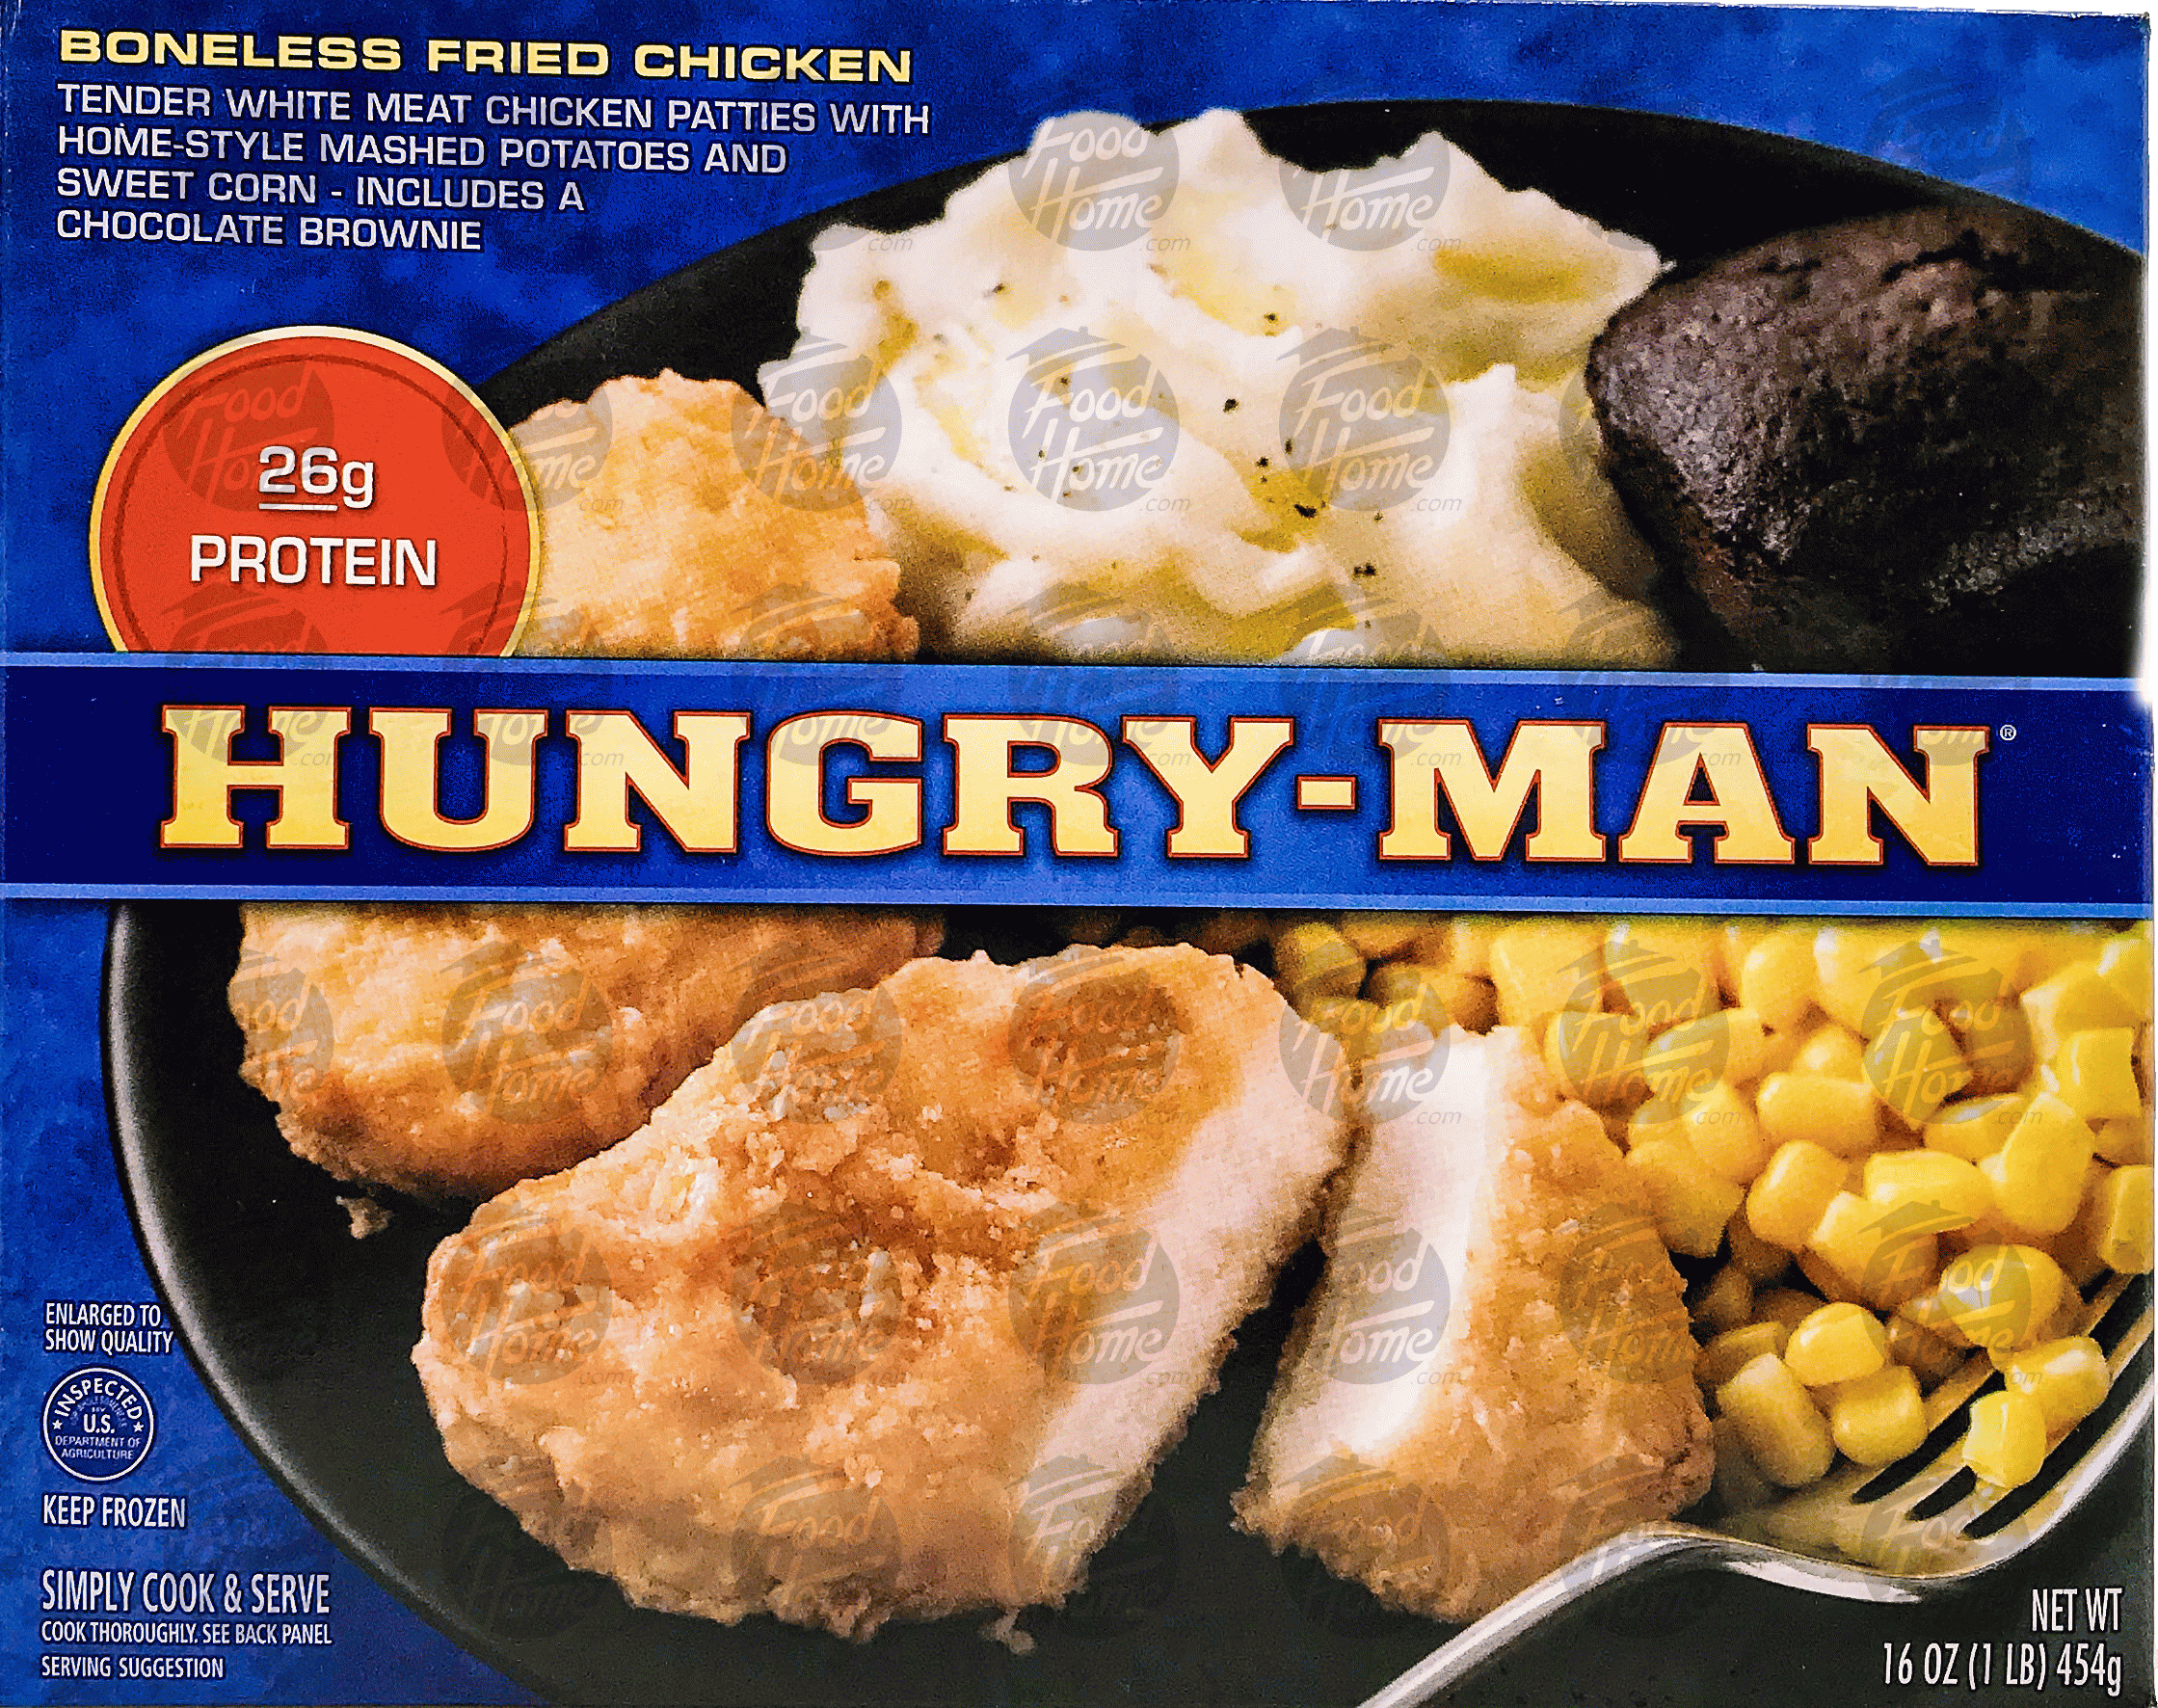 Hungry-Man  boneless fried chicken, with home-style mashed potatoes and sweet corn, includes a chocolate brownie Full-Size Picture